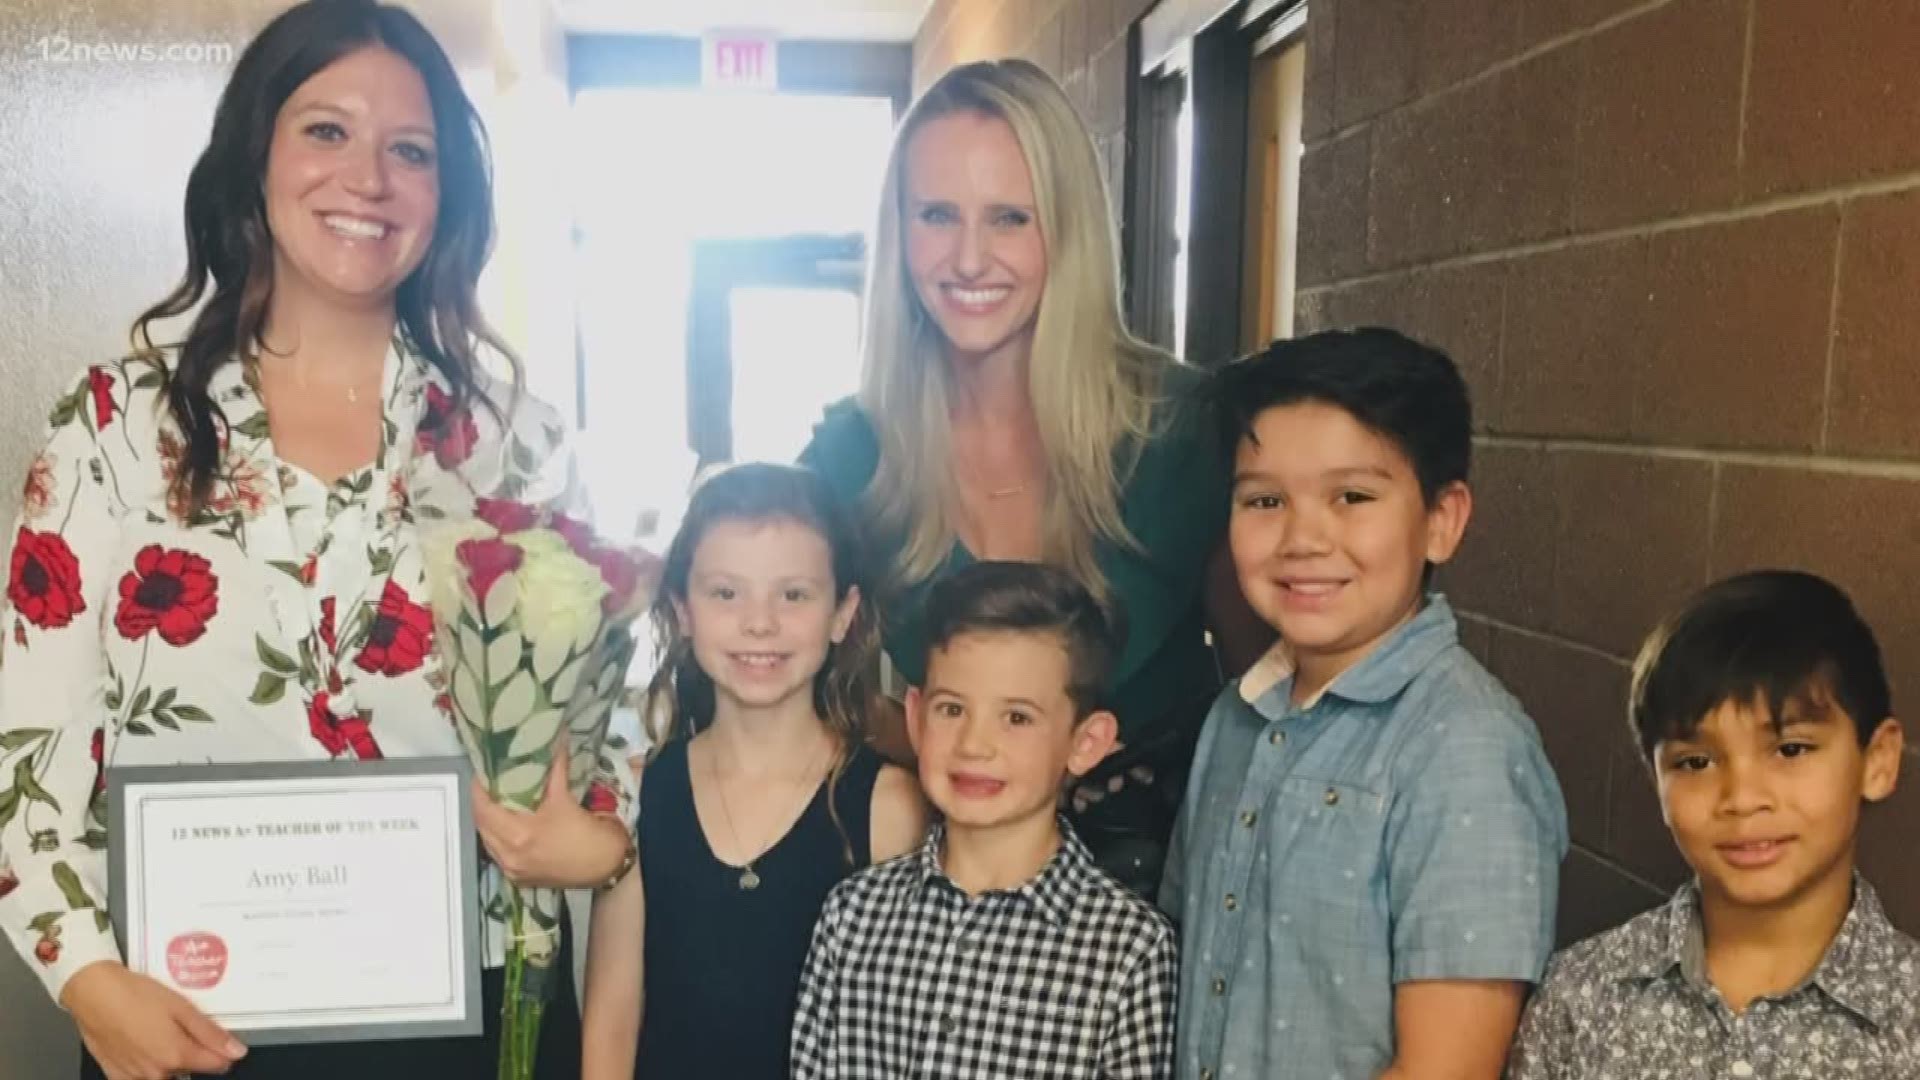 Amy Ball is a veteran educator in Phoenix and our A+ Teacher of the Week. Trisha Hendricks surprises her with a couple of her former students to share the good news.